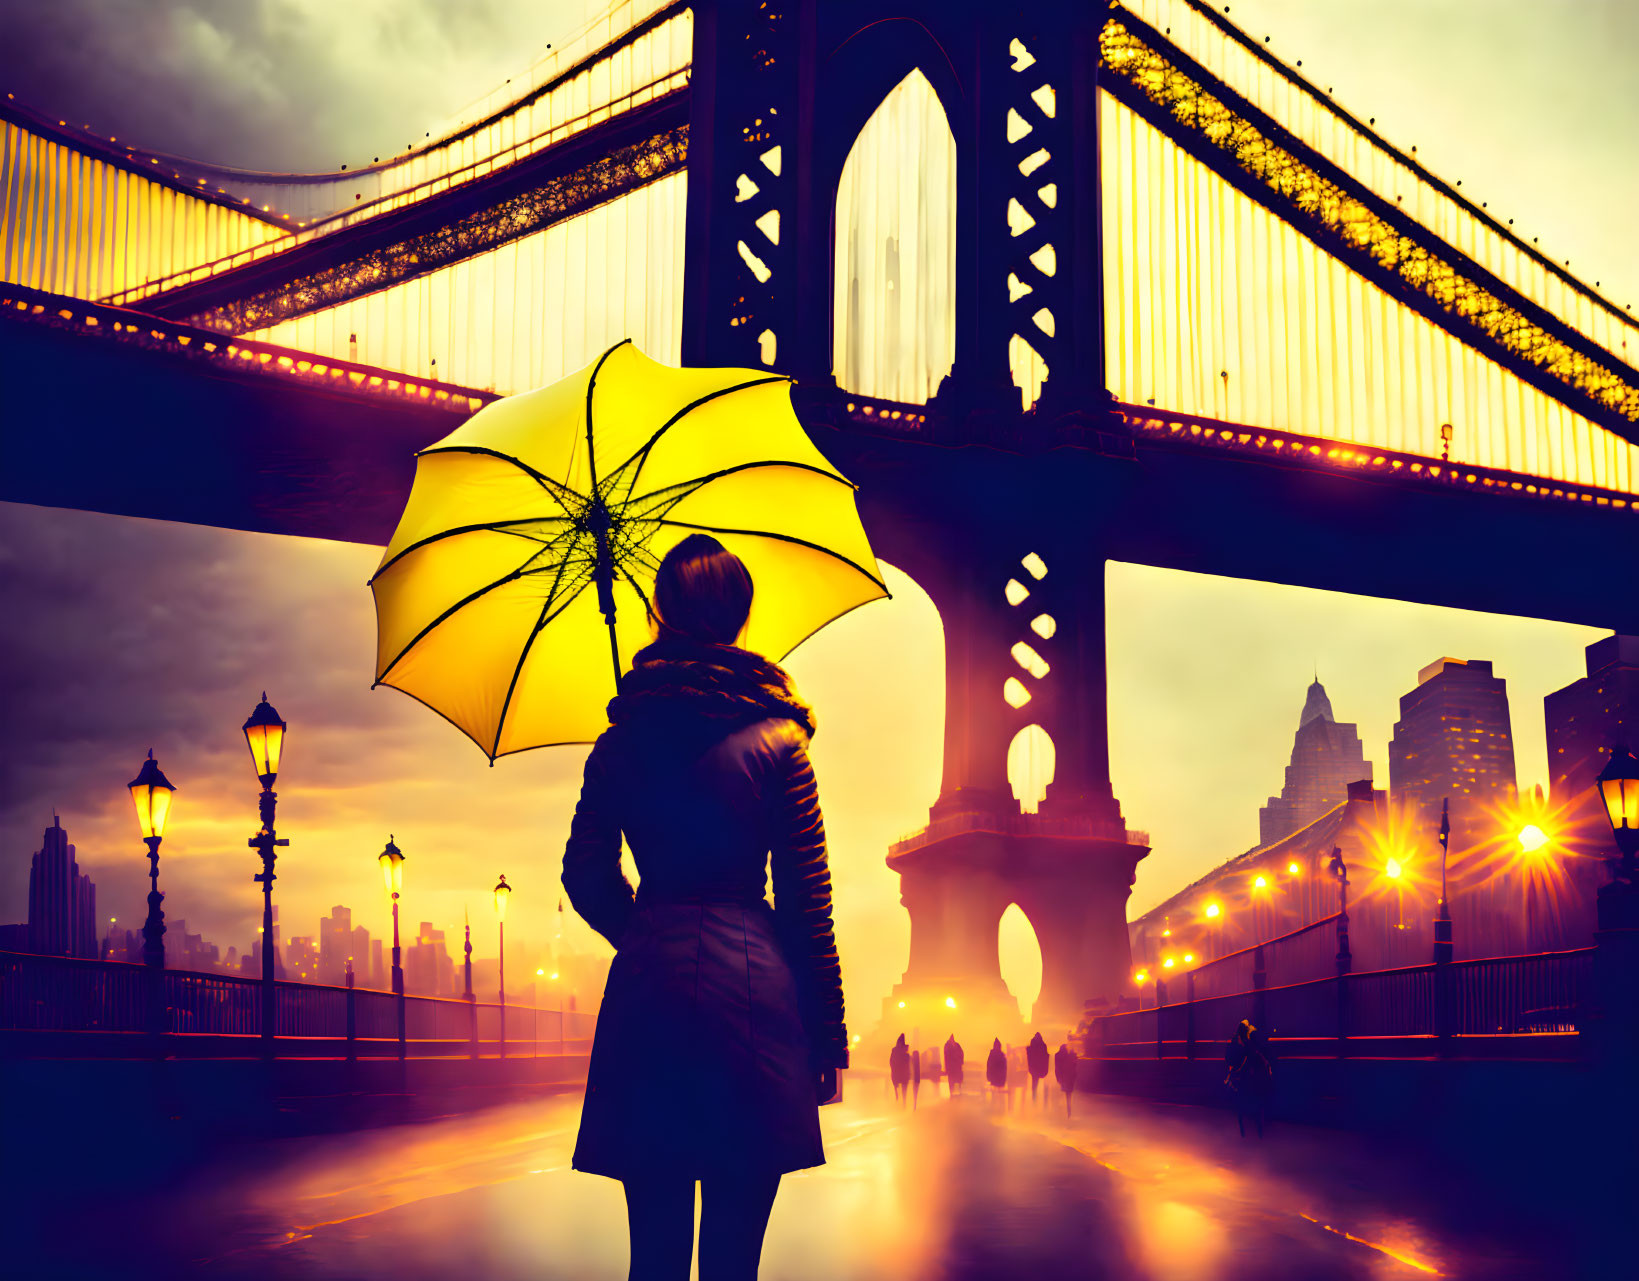 Silhouette of person with umbrella at dusk city skyline background